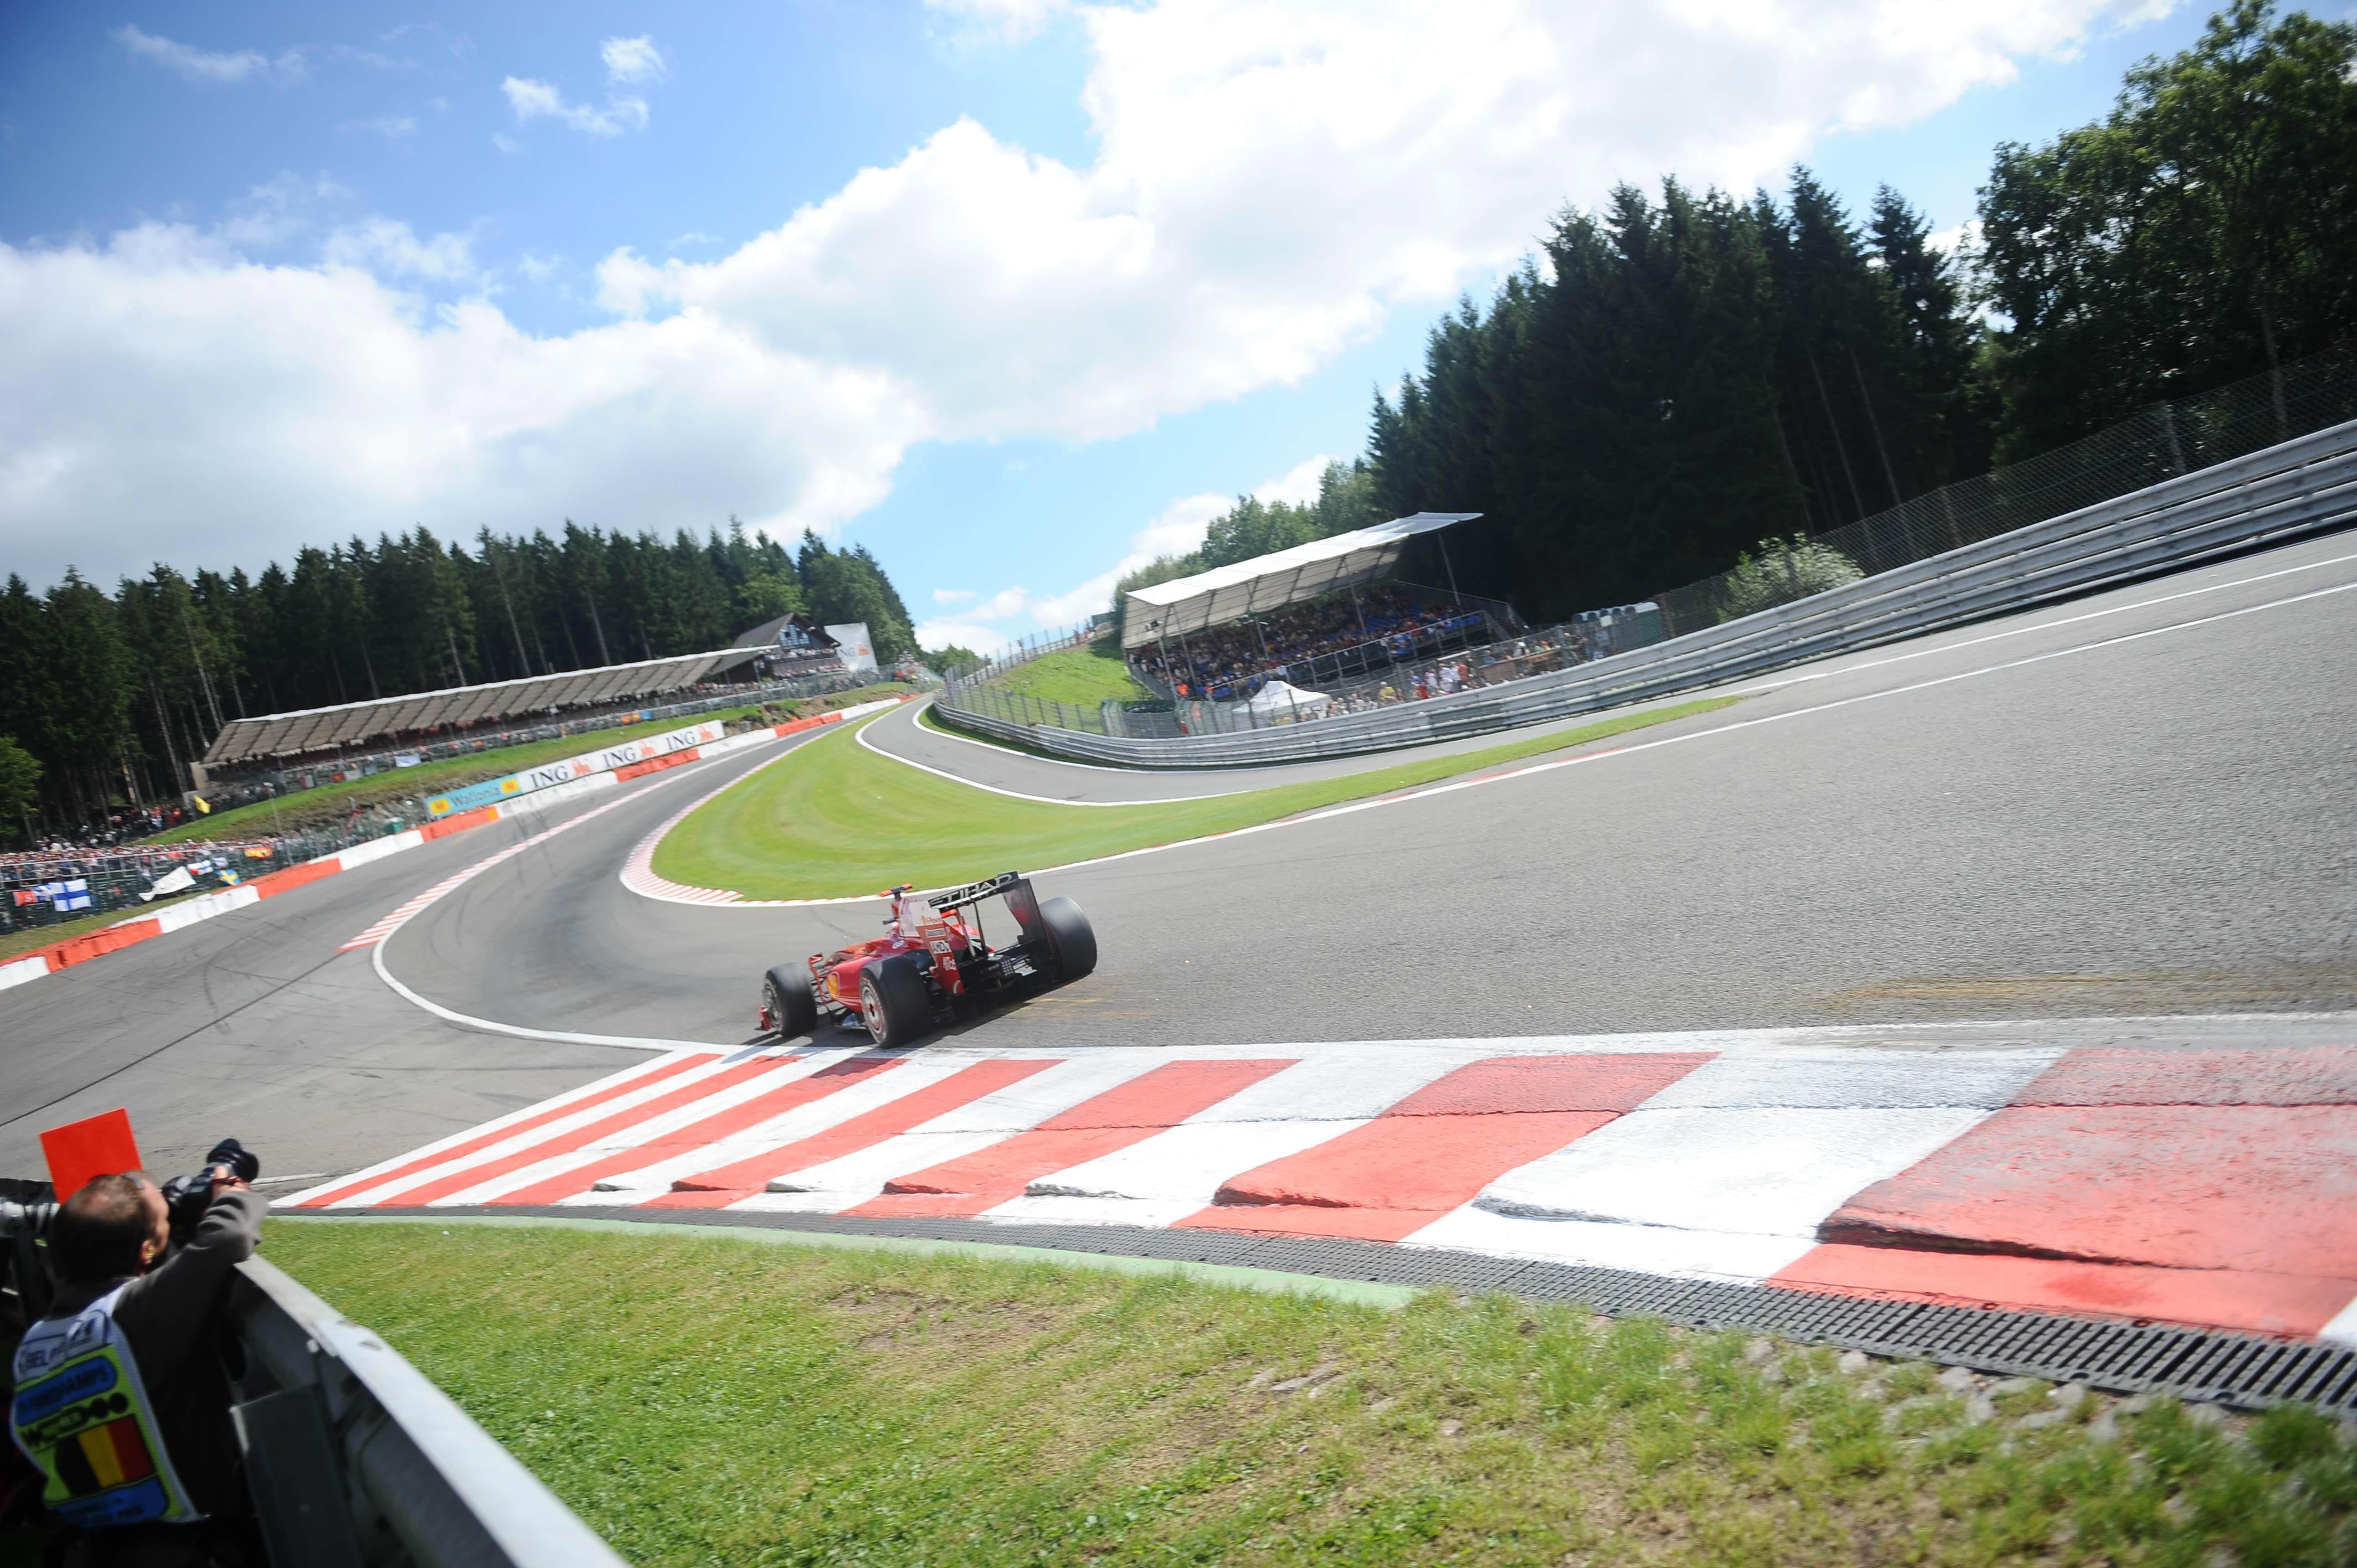 First track. Spa Francorchamps f1. F1 Spa Francorchamps Eau rouge Lauda. F1 Race track. Формула 1 спа Франкоршам.